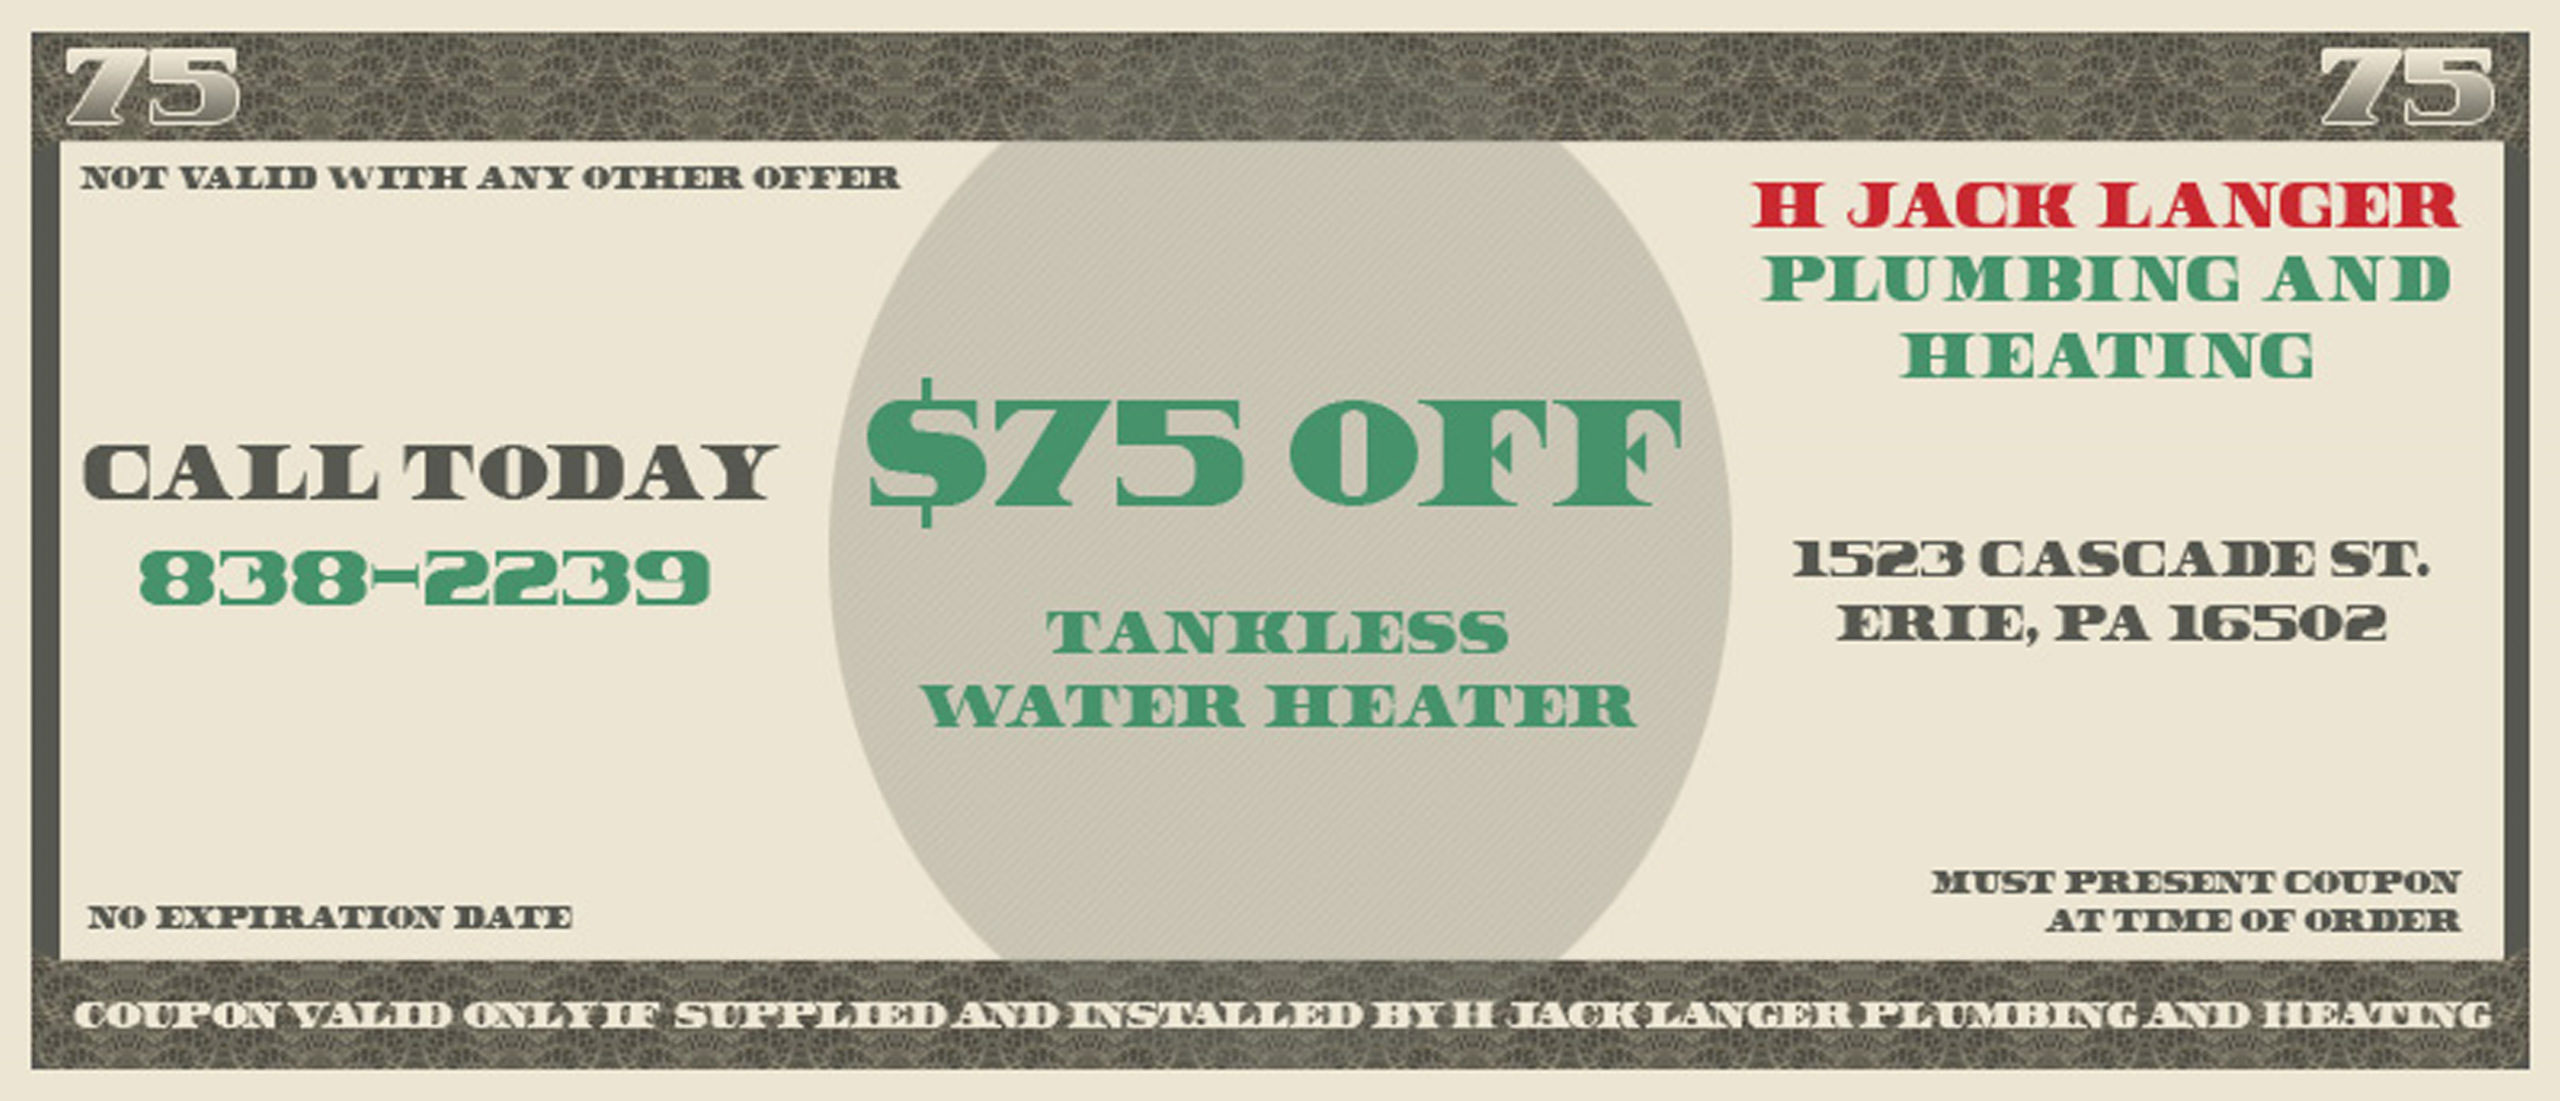 $75 Off Tankless Water Heater Coupon